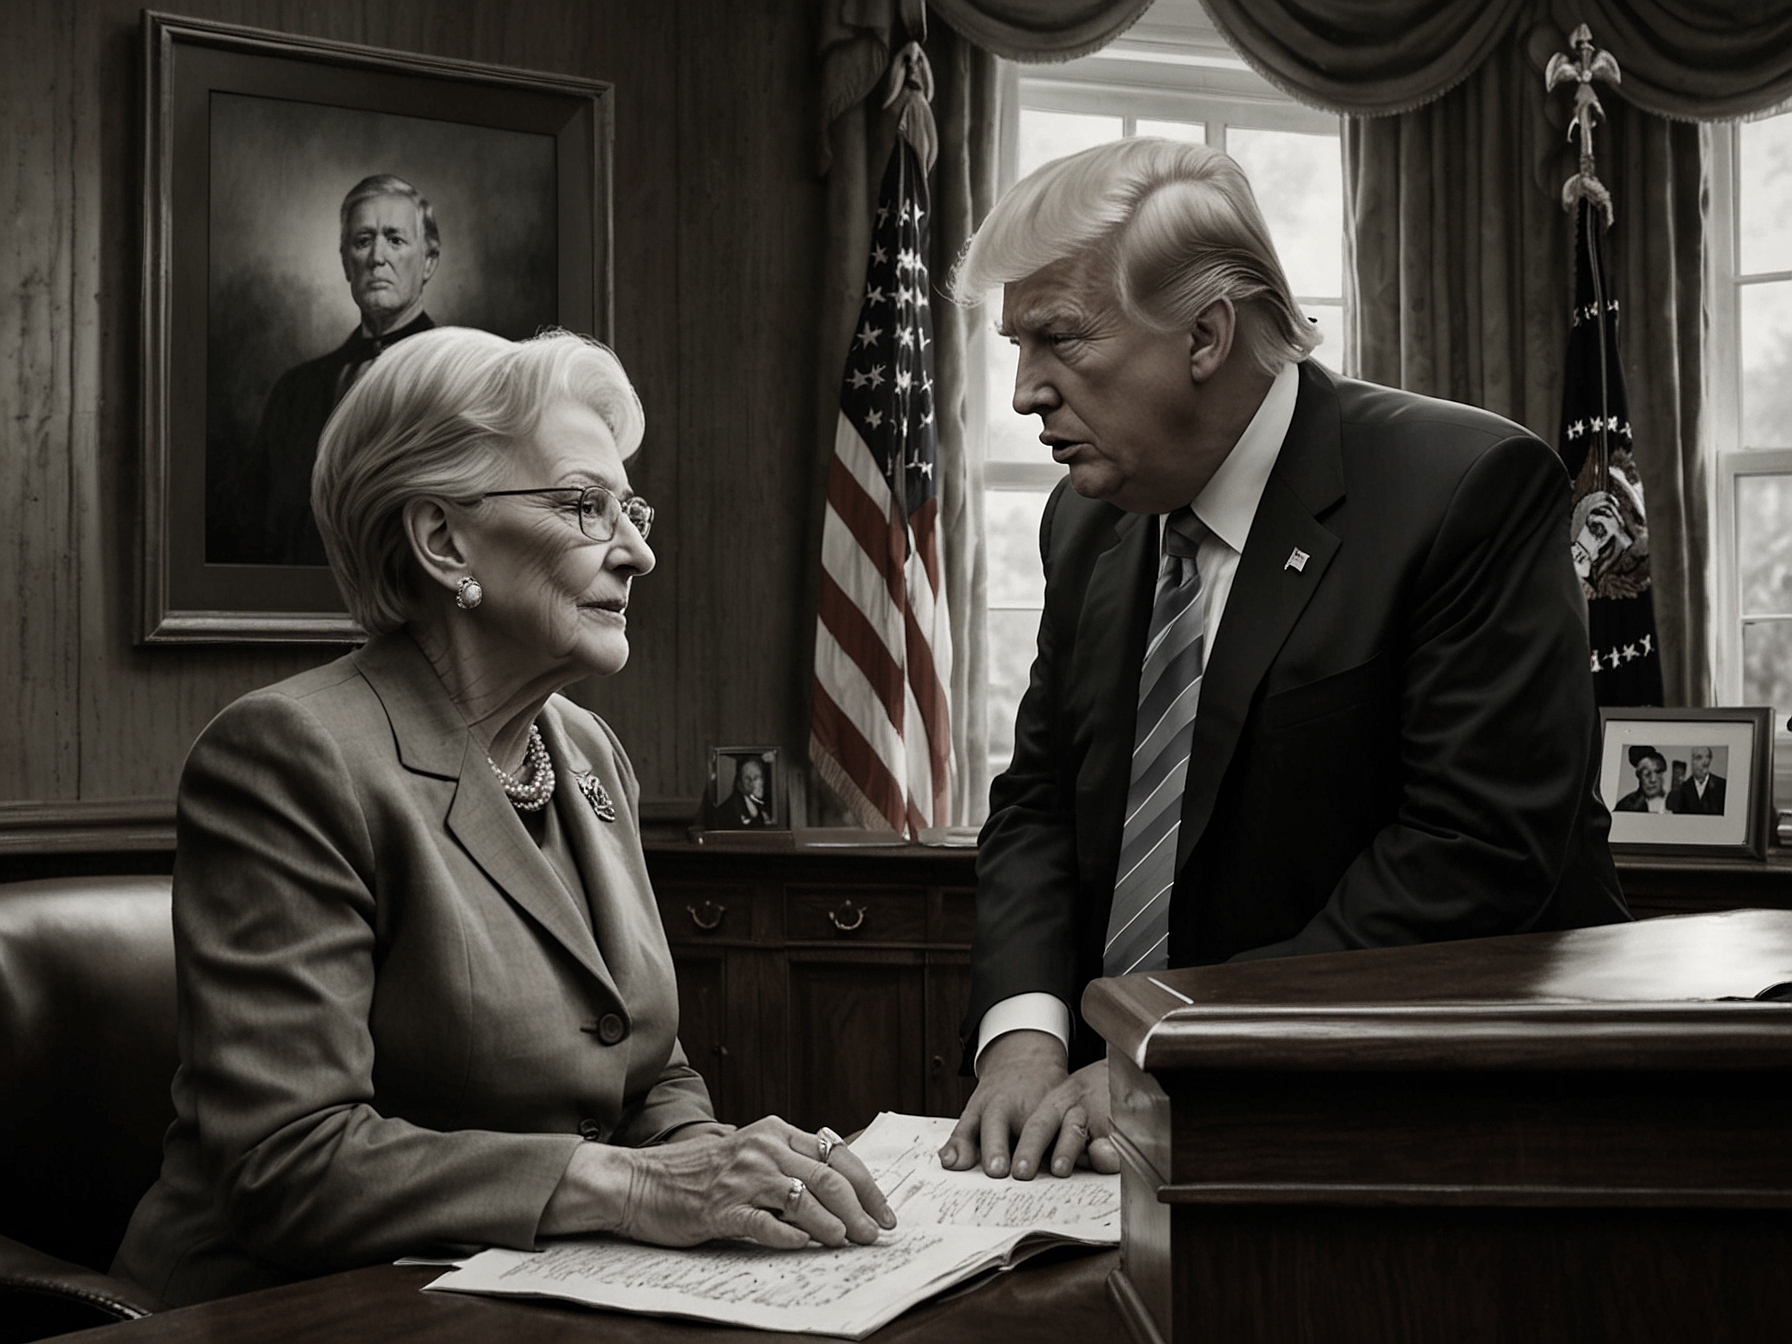 An illustration of a phone call scene between Donald Trump and Jocelyn's mother, capturing Trump's empathy and the emotional impact of the conversation amidst the contentious debate on immigration policies.